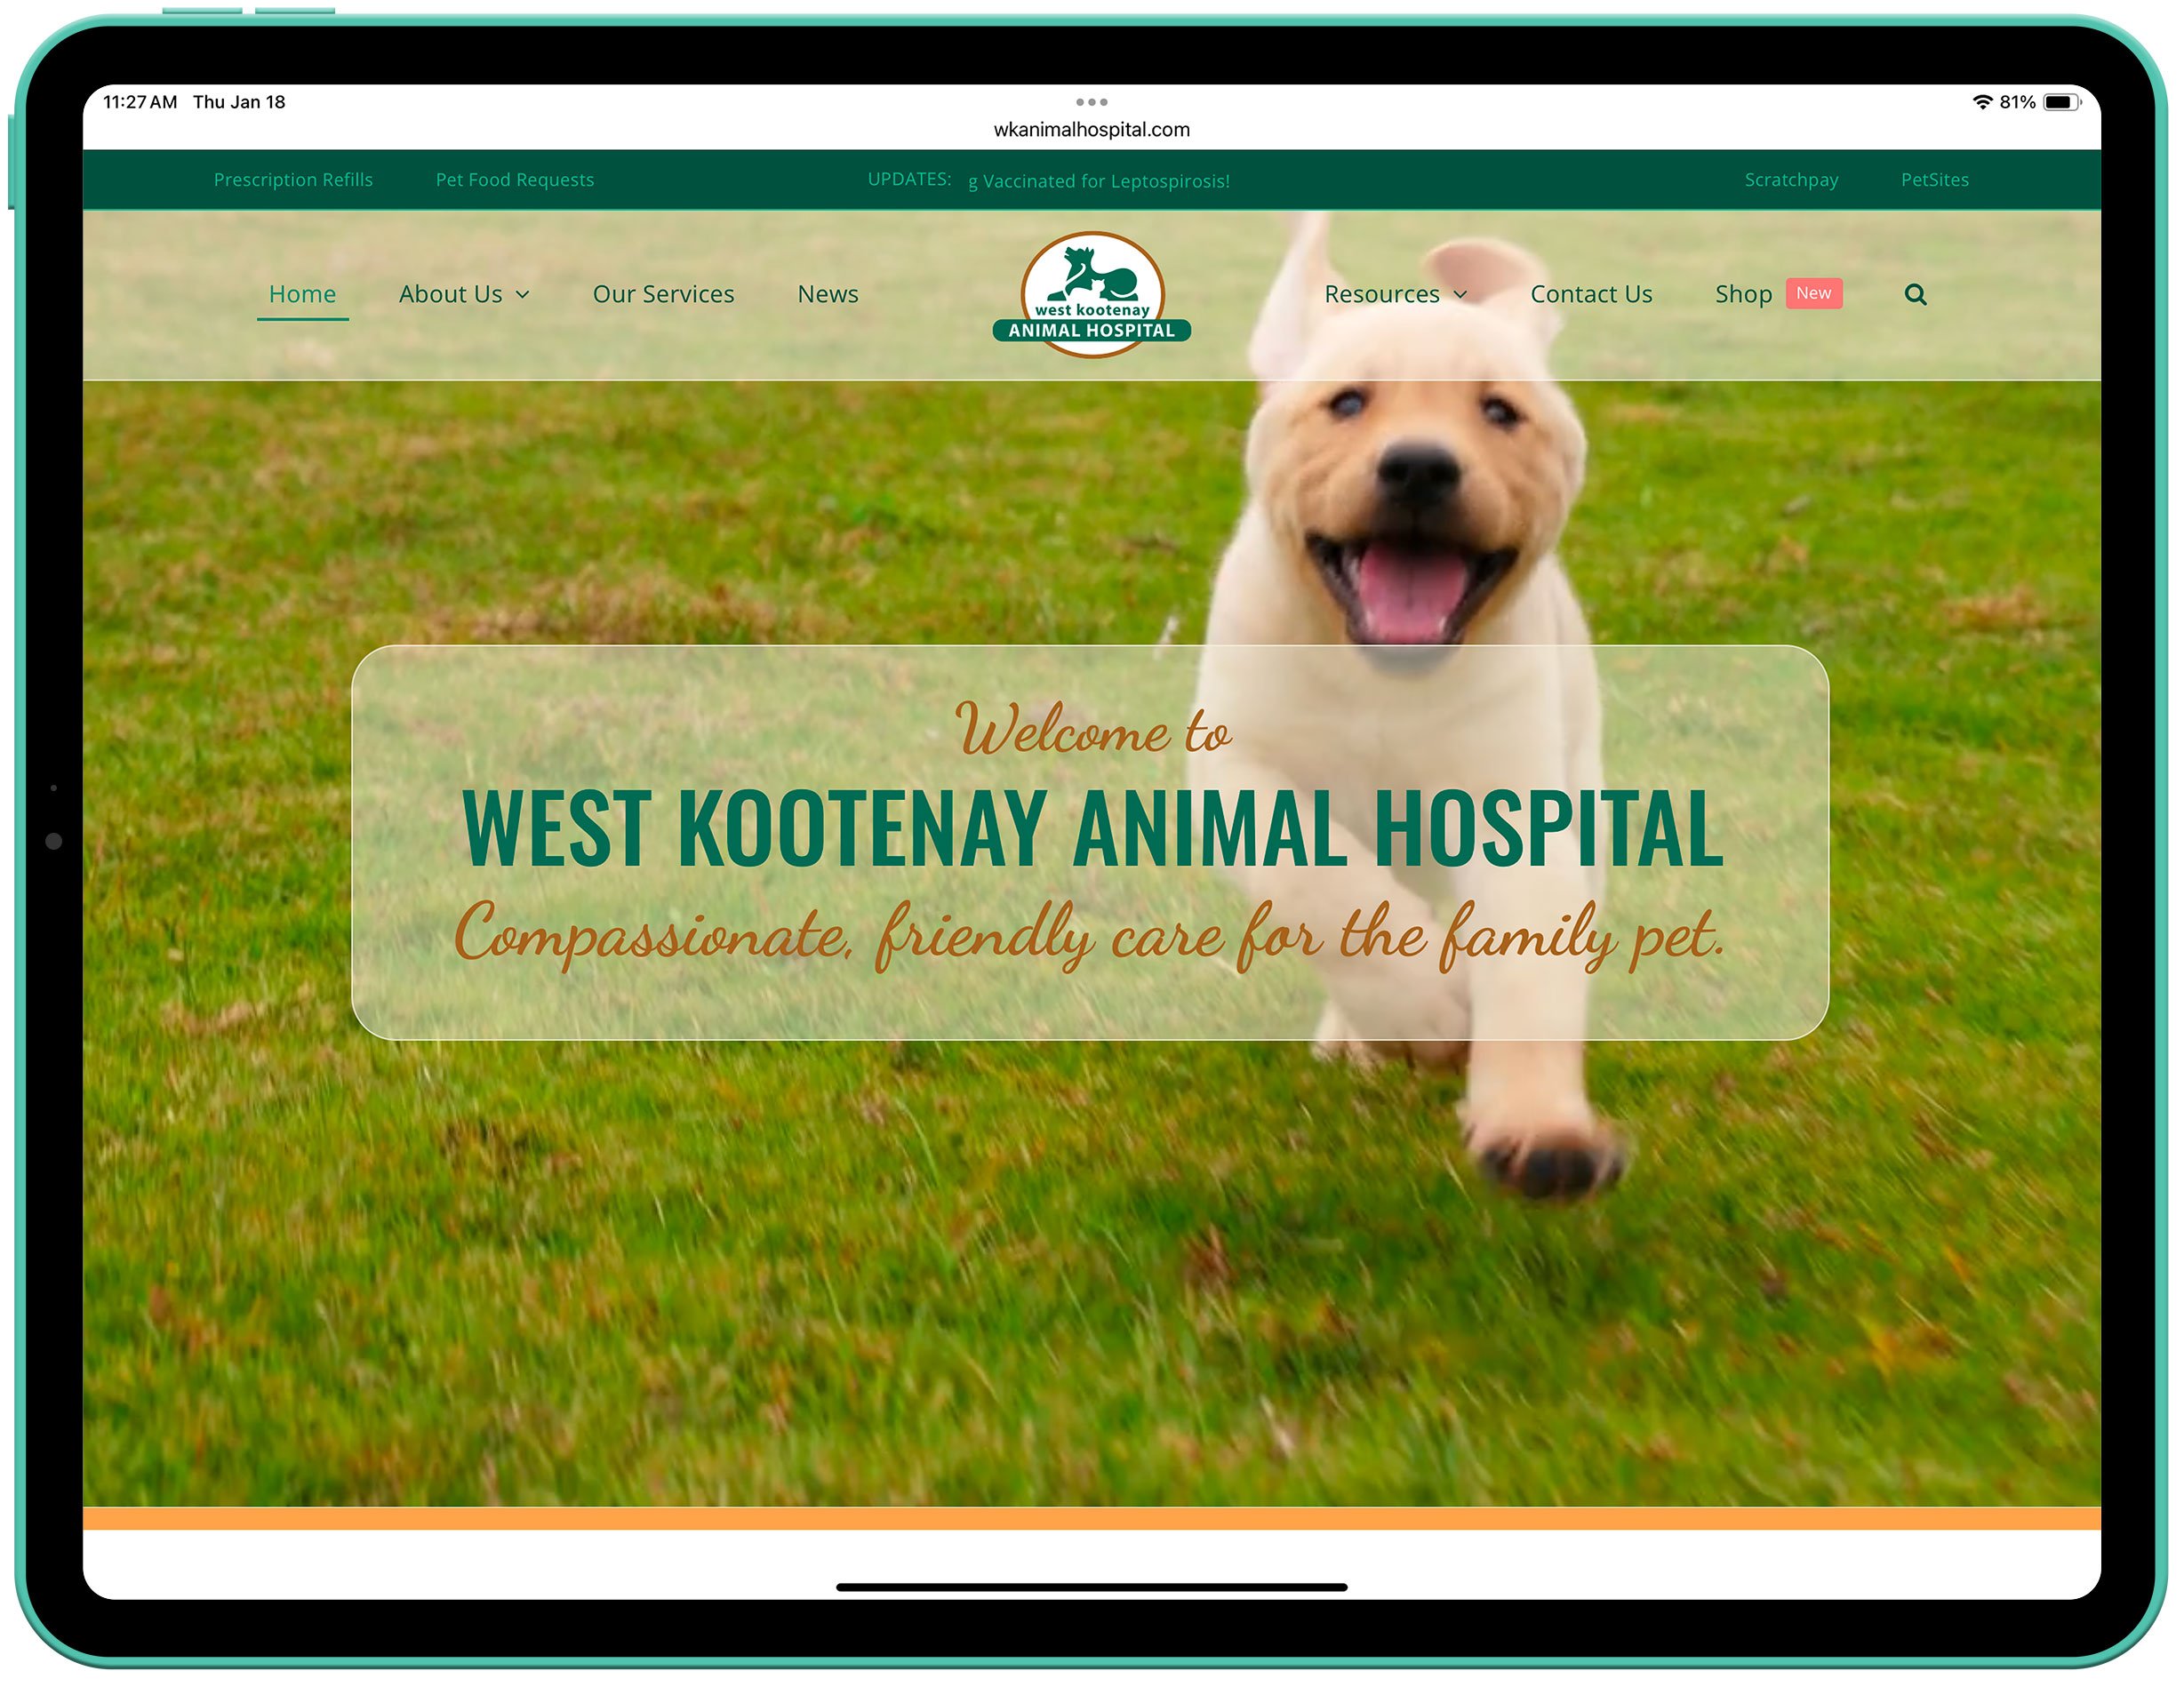 West Kootenay Animal Hospital in Trail BC - Website Home Page - Tablet